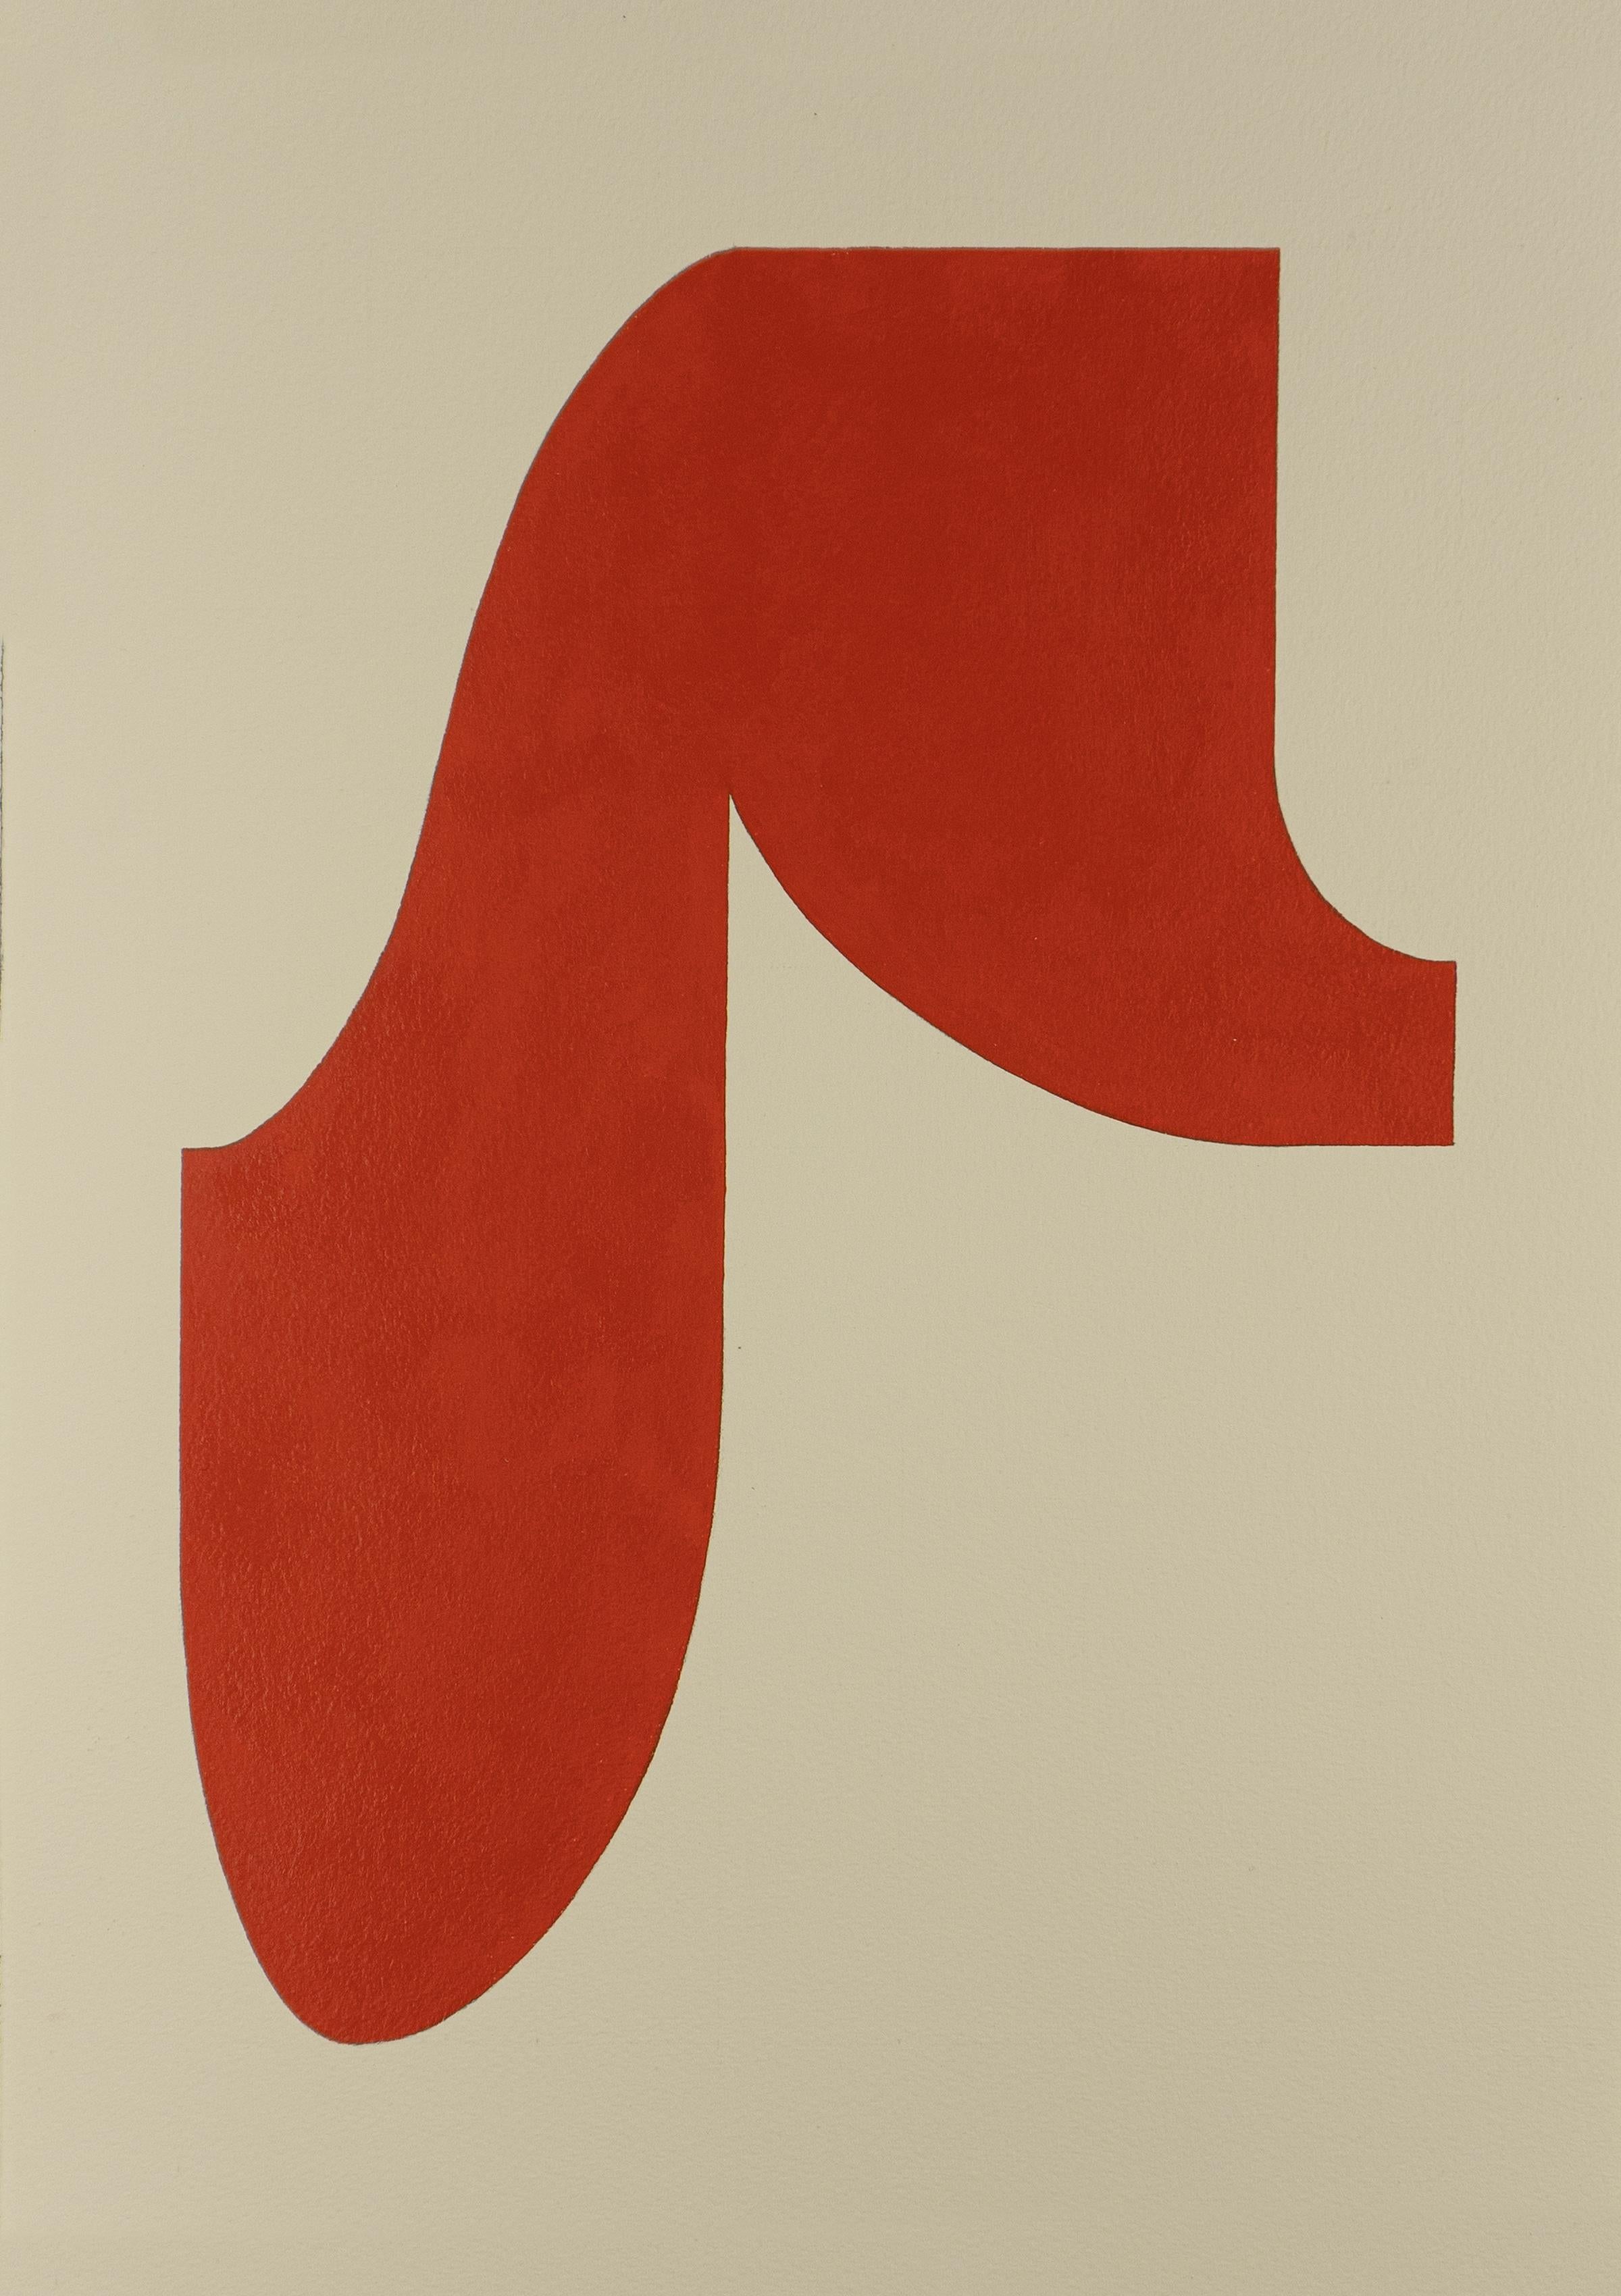 Shape 22 (2019) - Abstract shape, minimalist gestural, deep red & white on paper